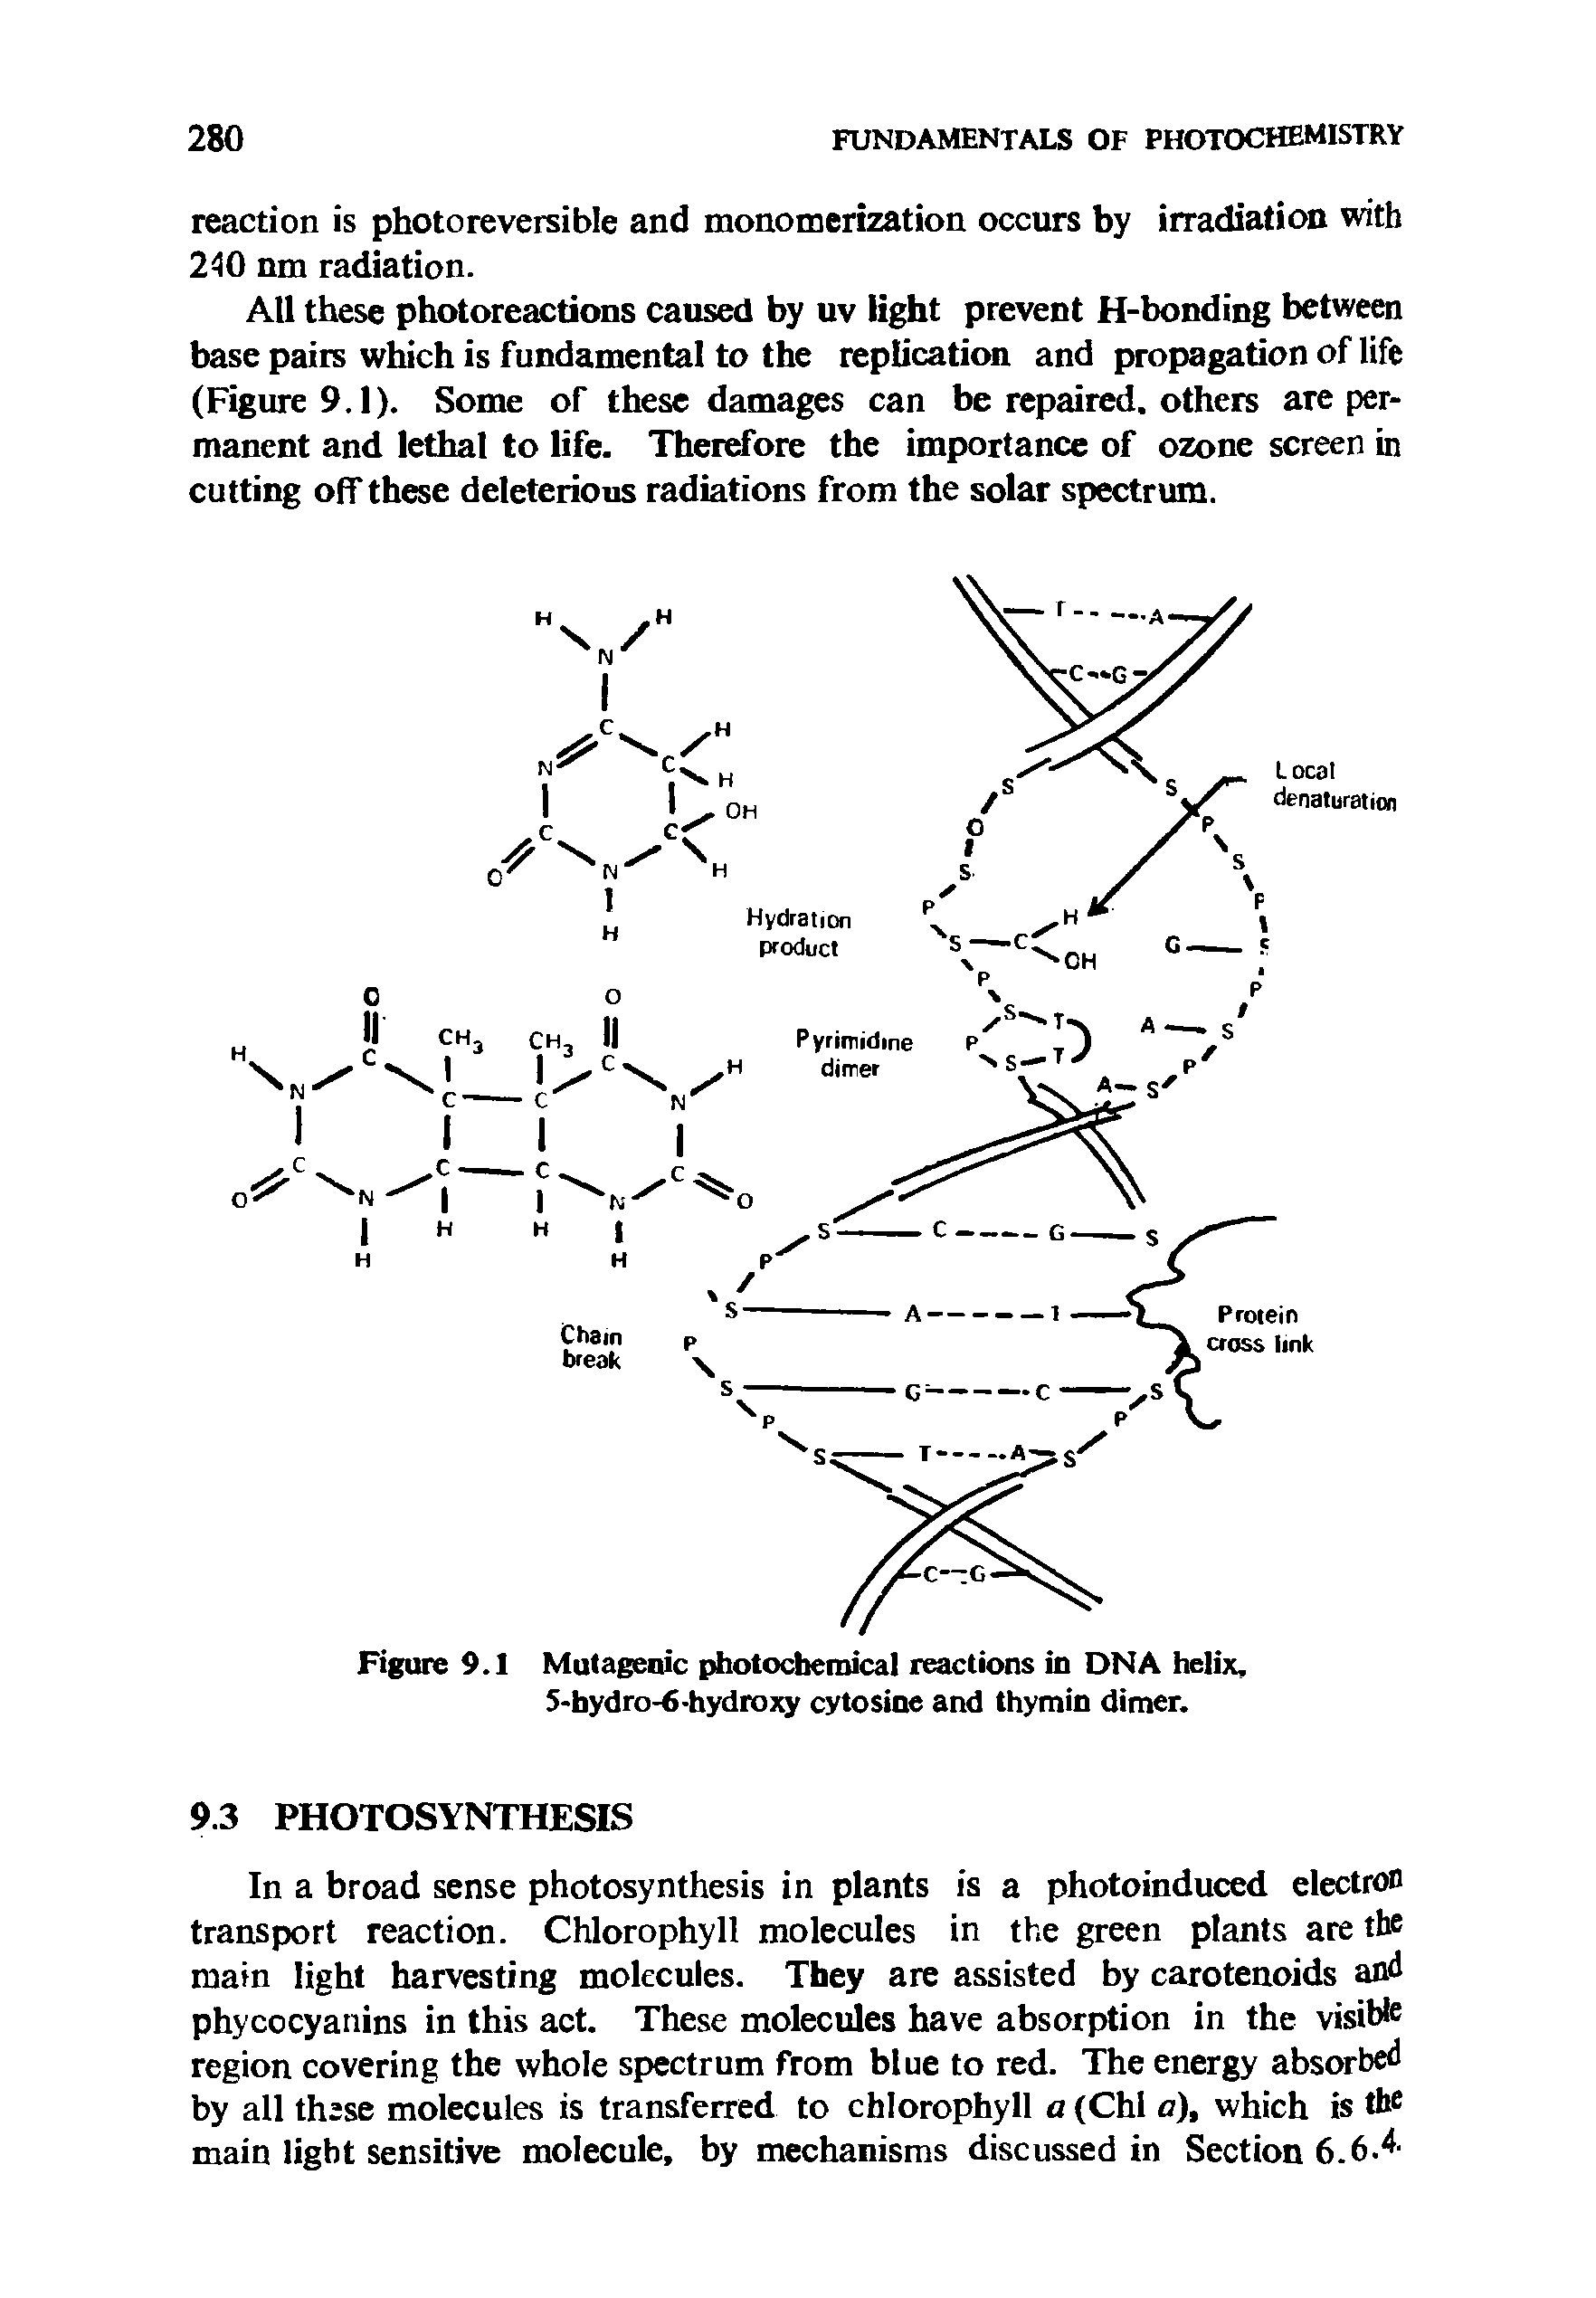 Figure 9.1 Mutagenic photochemical reactions in DNA helix, 5-hydro-6-hydroxy cytosine and thymin dimer.